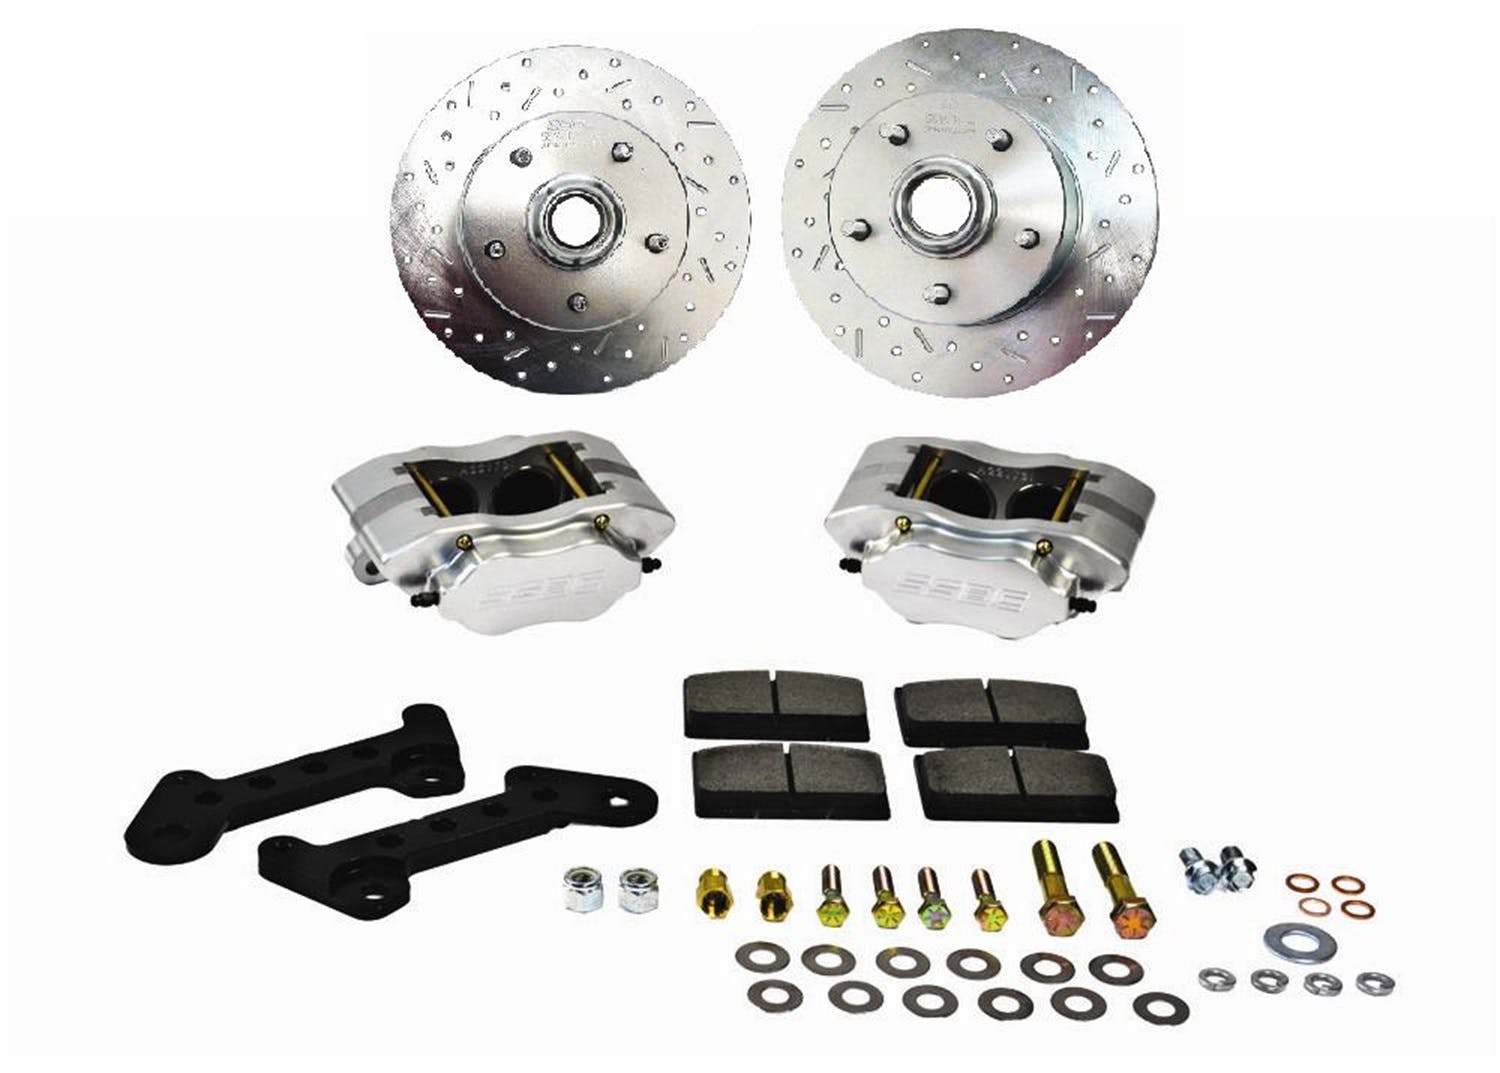 Stainless Steel Brakes W123-24 At The Wheels Comp R front 64-74 GM drum to disc